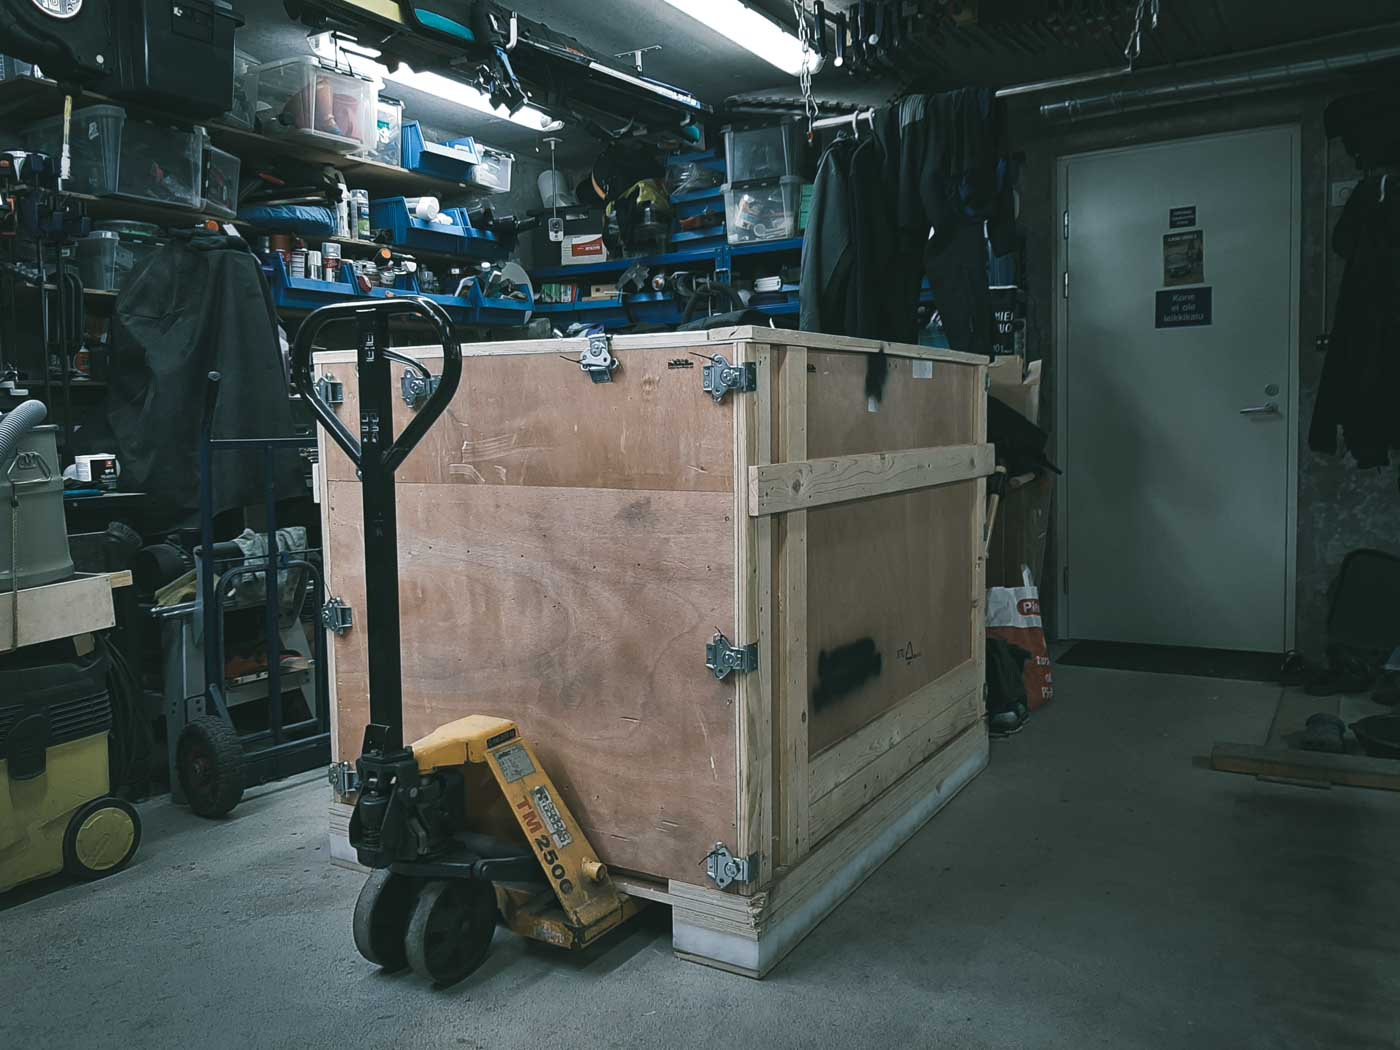 Motorcycle transport crate